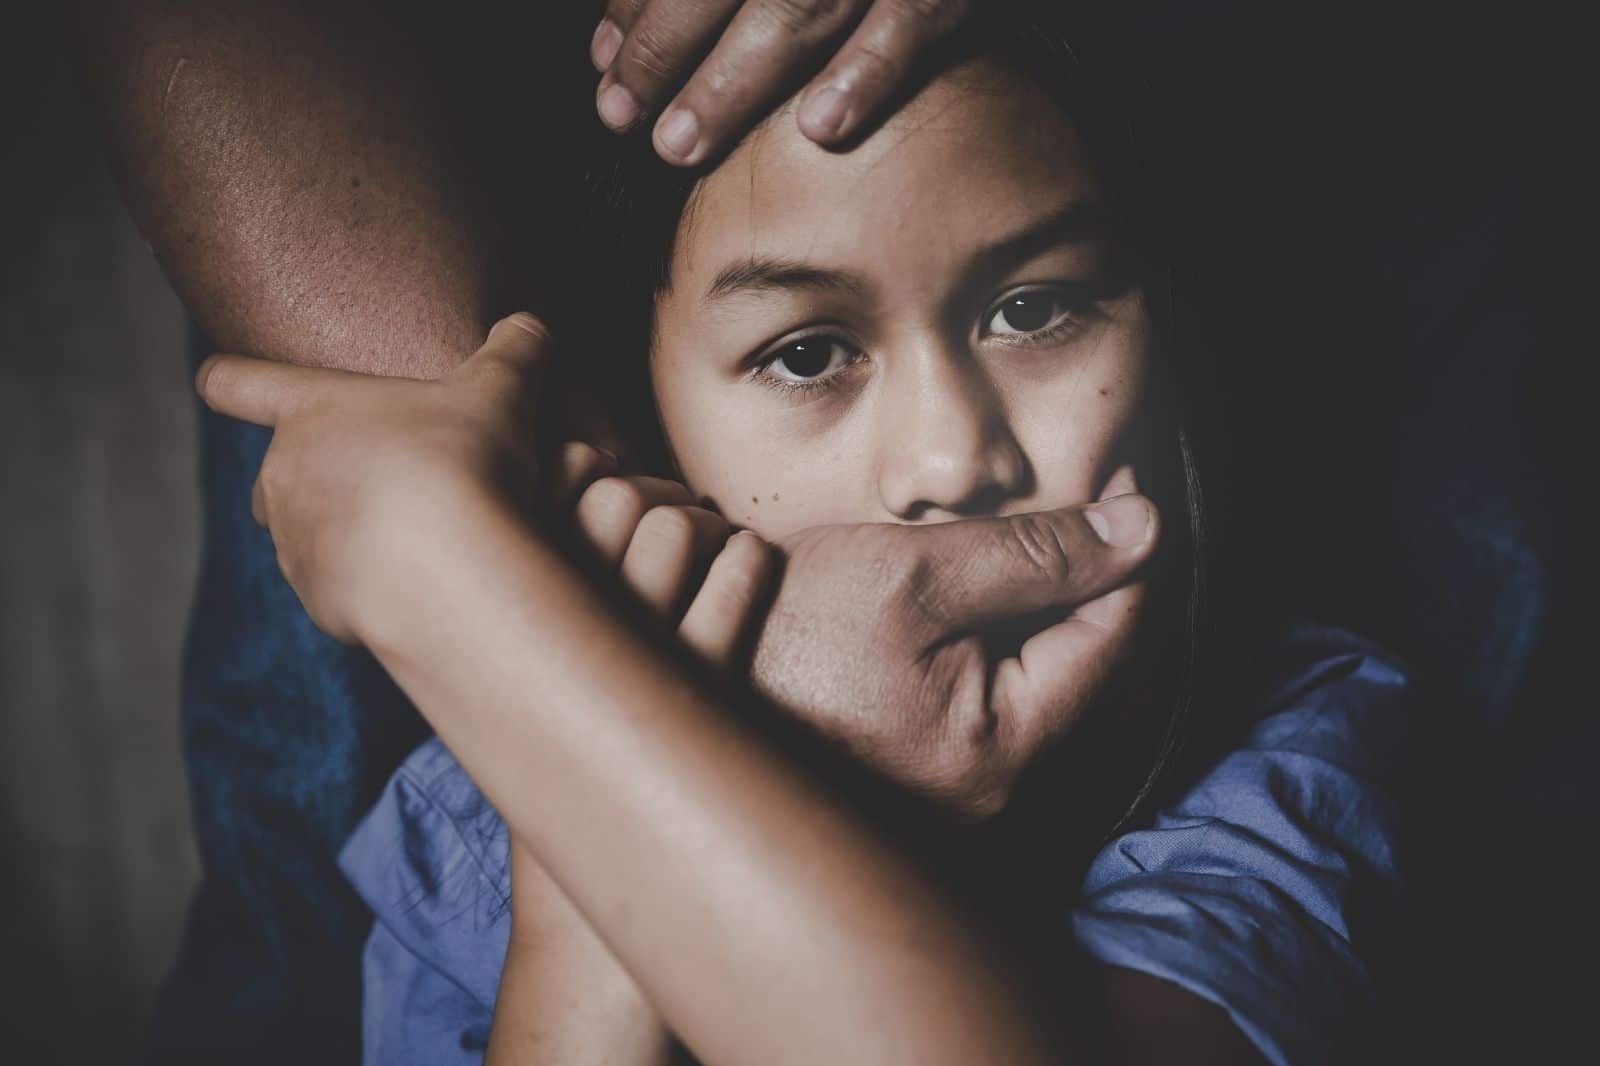 Child Sexual Abuse - Video | 